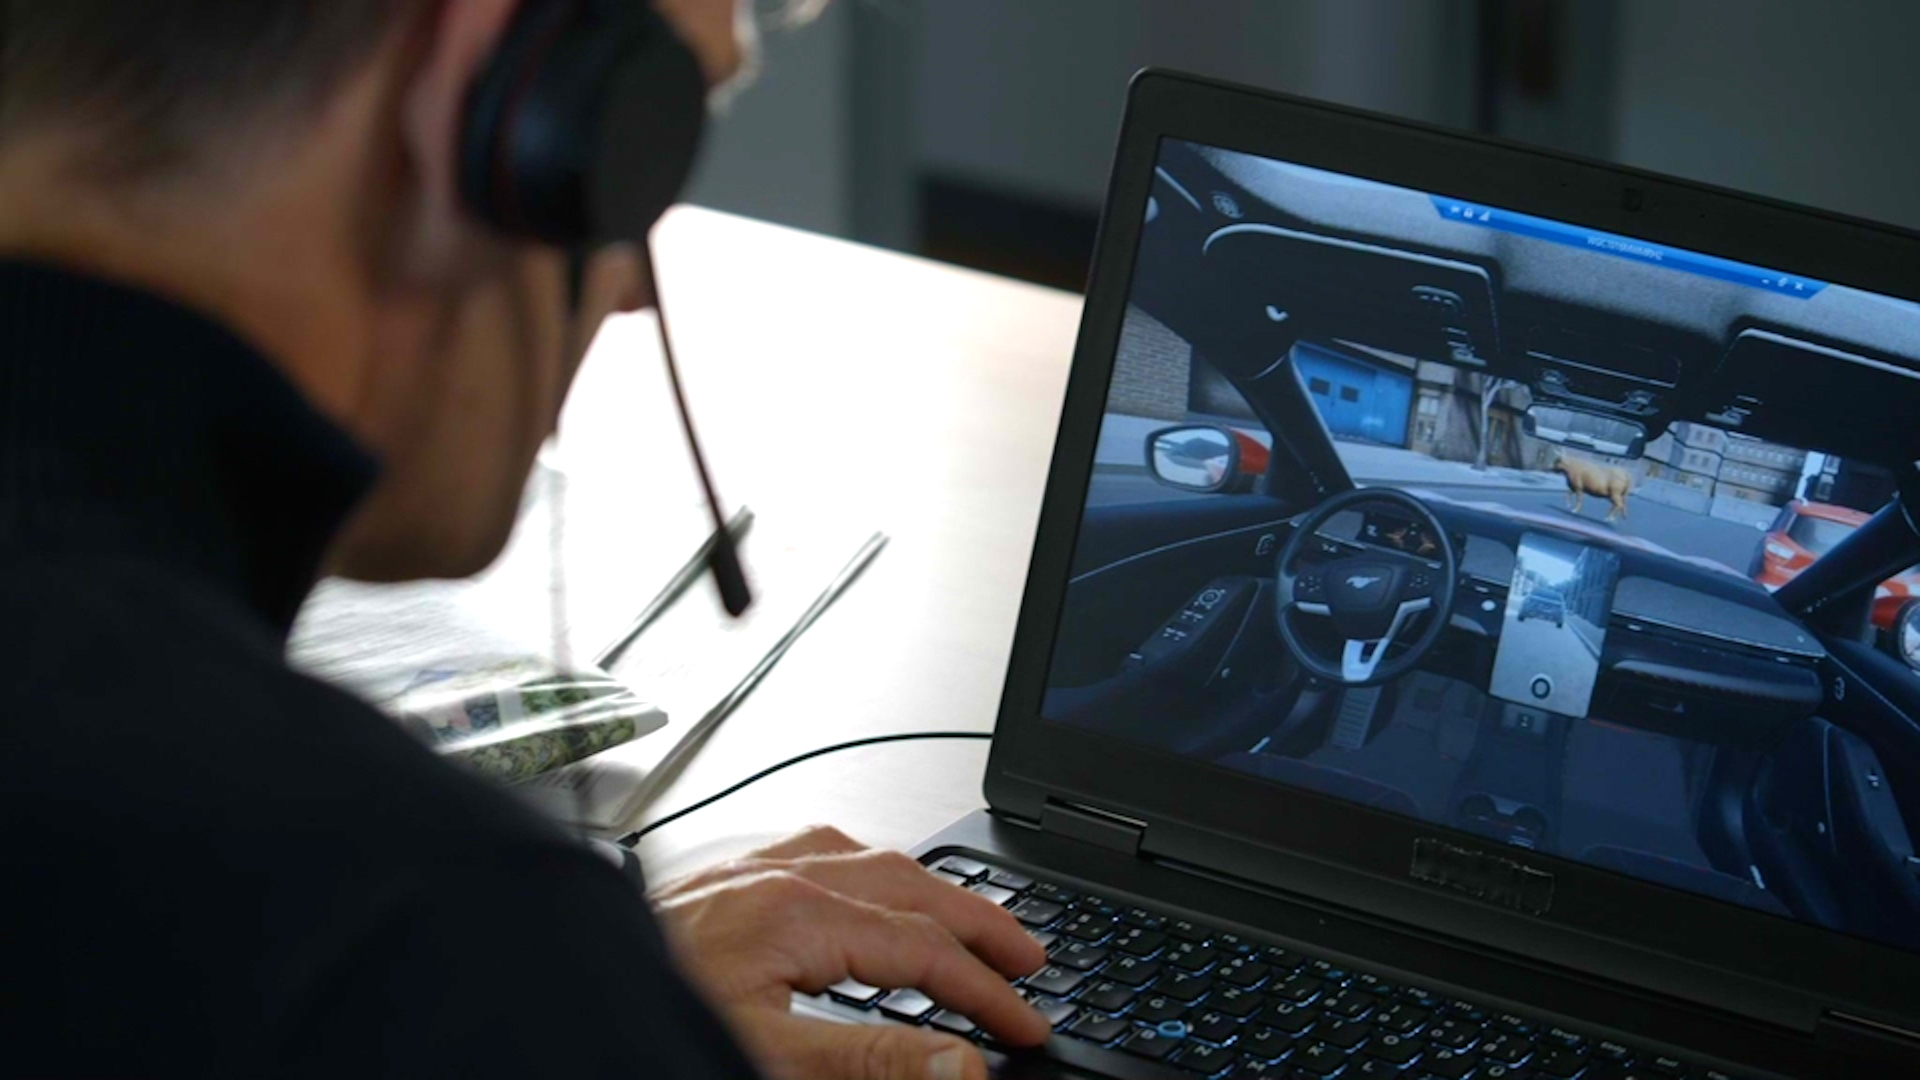 Engineers build simulations that enable them to trial how useful customers find new technologies, while designers use animations to create virtual prototypes. Ford even designed a vehicle in collaboration with the gaming community